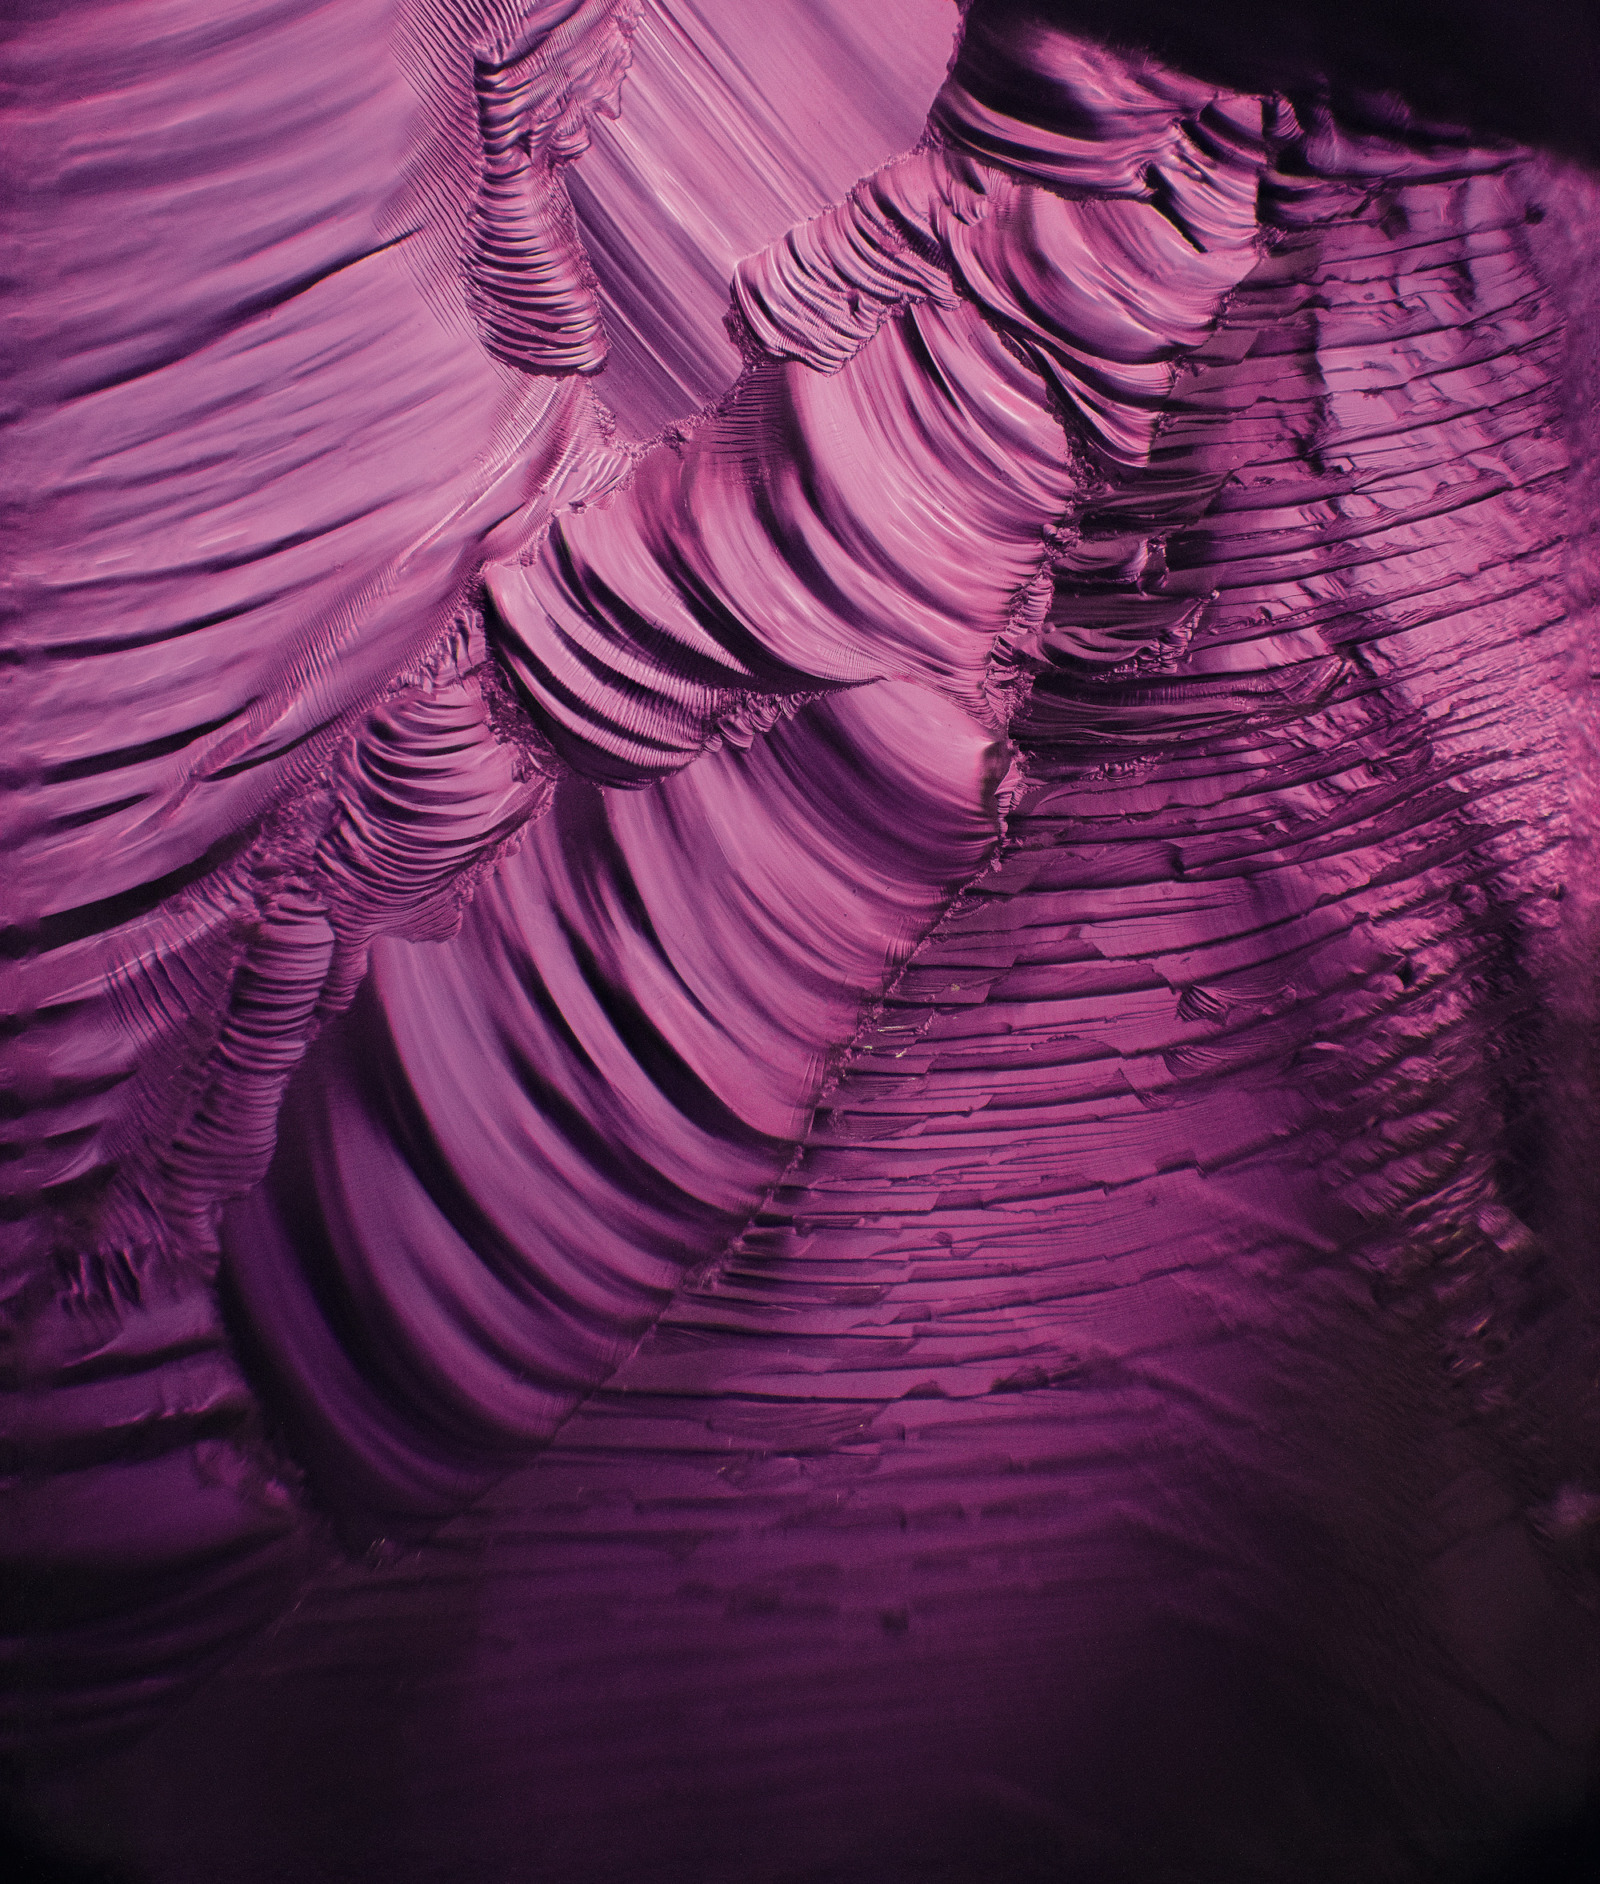 Conchoidal Fracture of an Amethyst Crystal